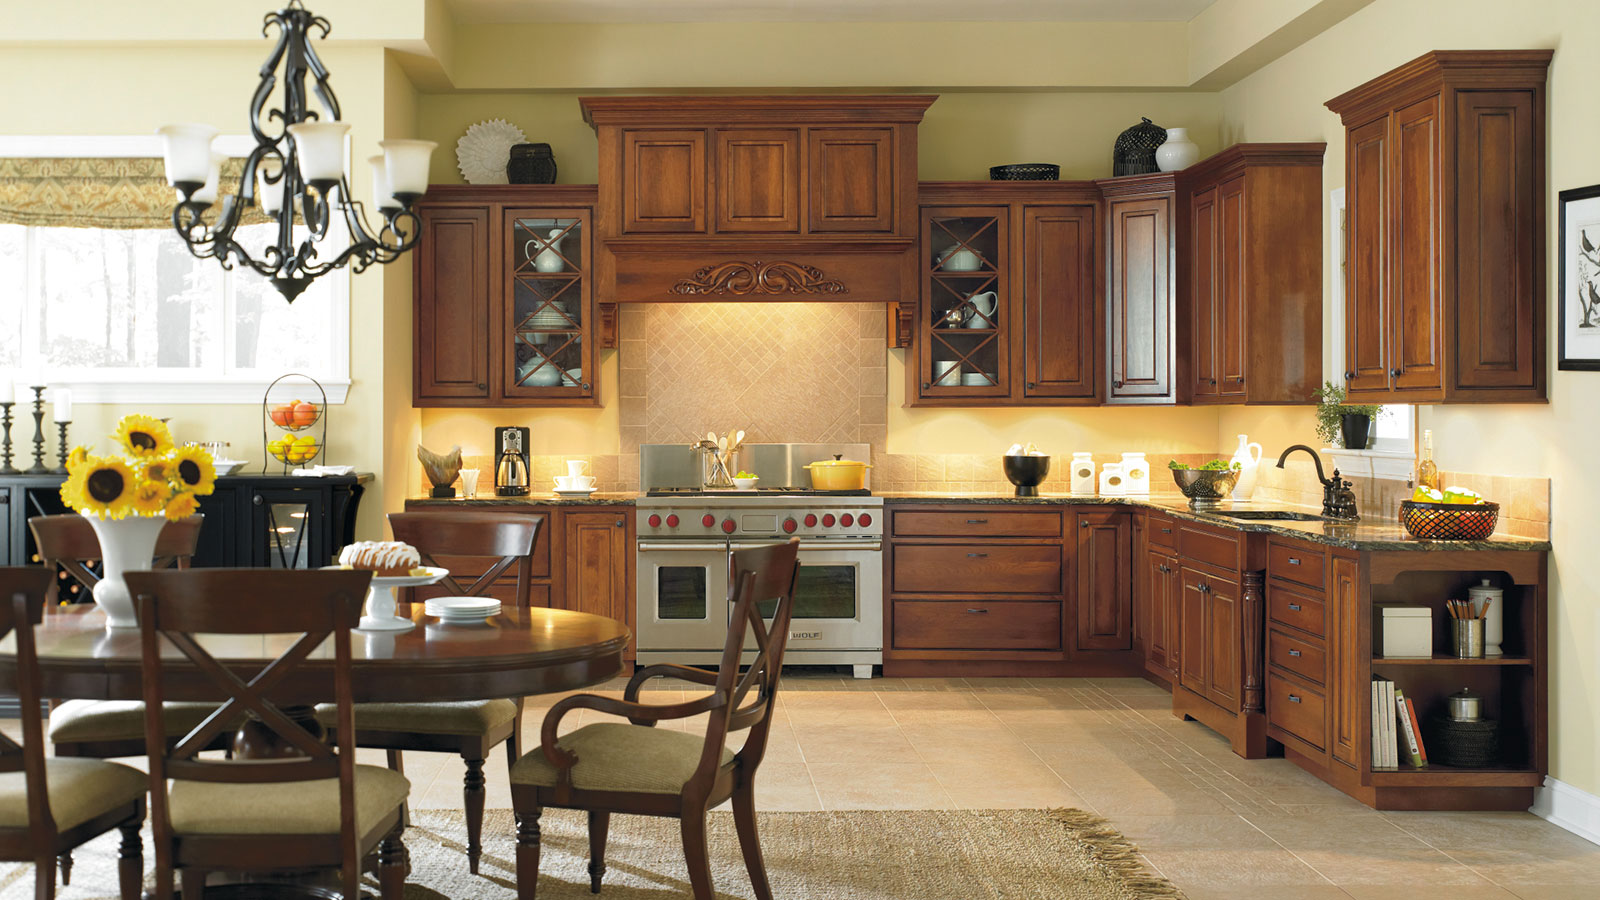 https://www.omegacabinetry.com/-/media/omegacab/products/environment/portage/inset_kitchen_cabinets_large.jpg